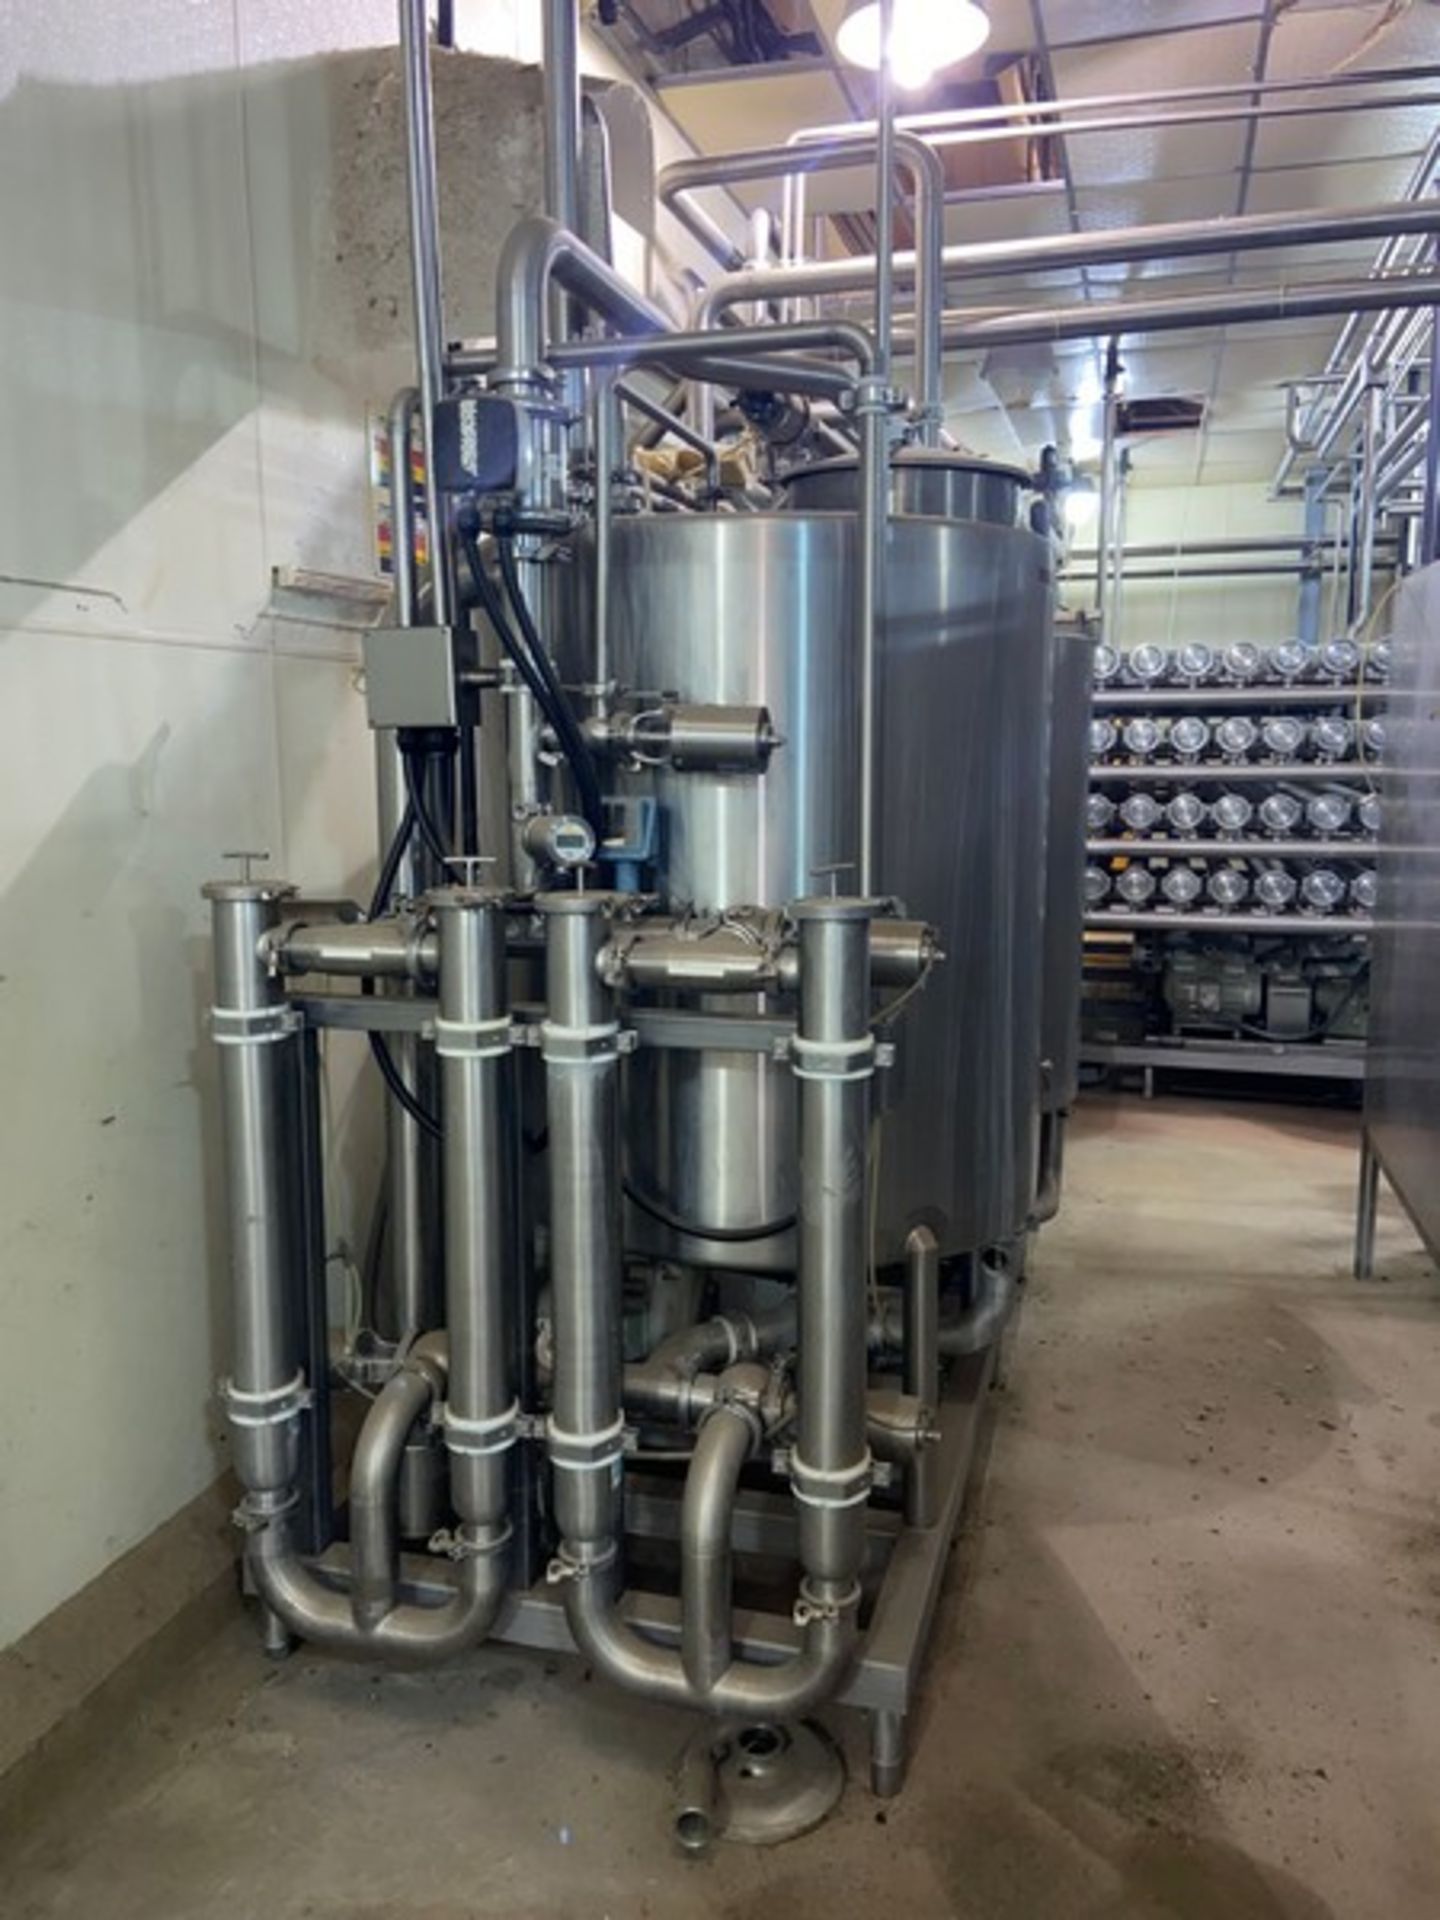 2-Tank 300 Gal. CIP System, Tank Dims.: Aprox. 4 ft. H x 4 ft. Dia., with Associated S/S Filters, - Image 3 of 3